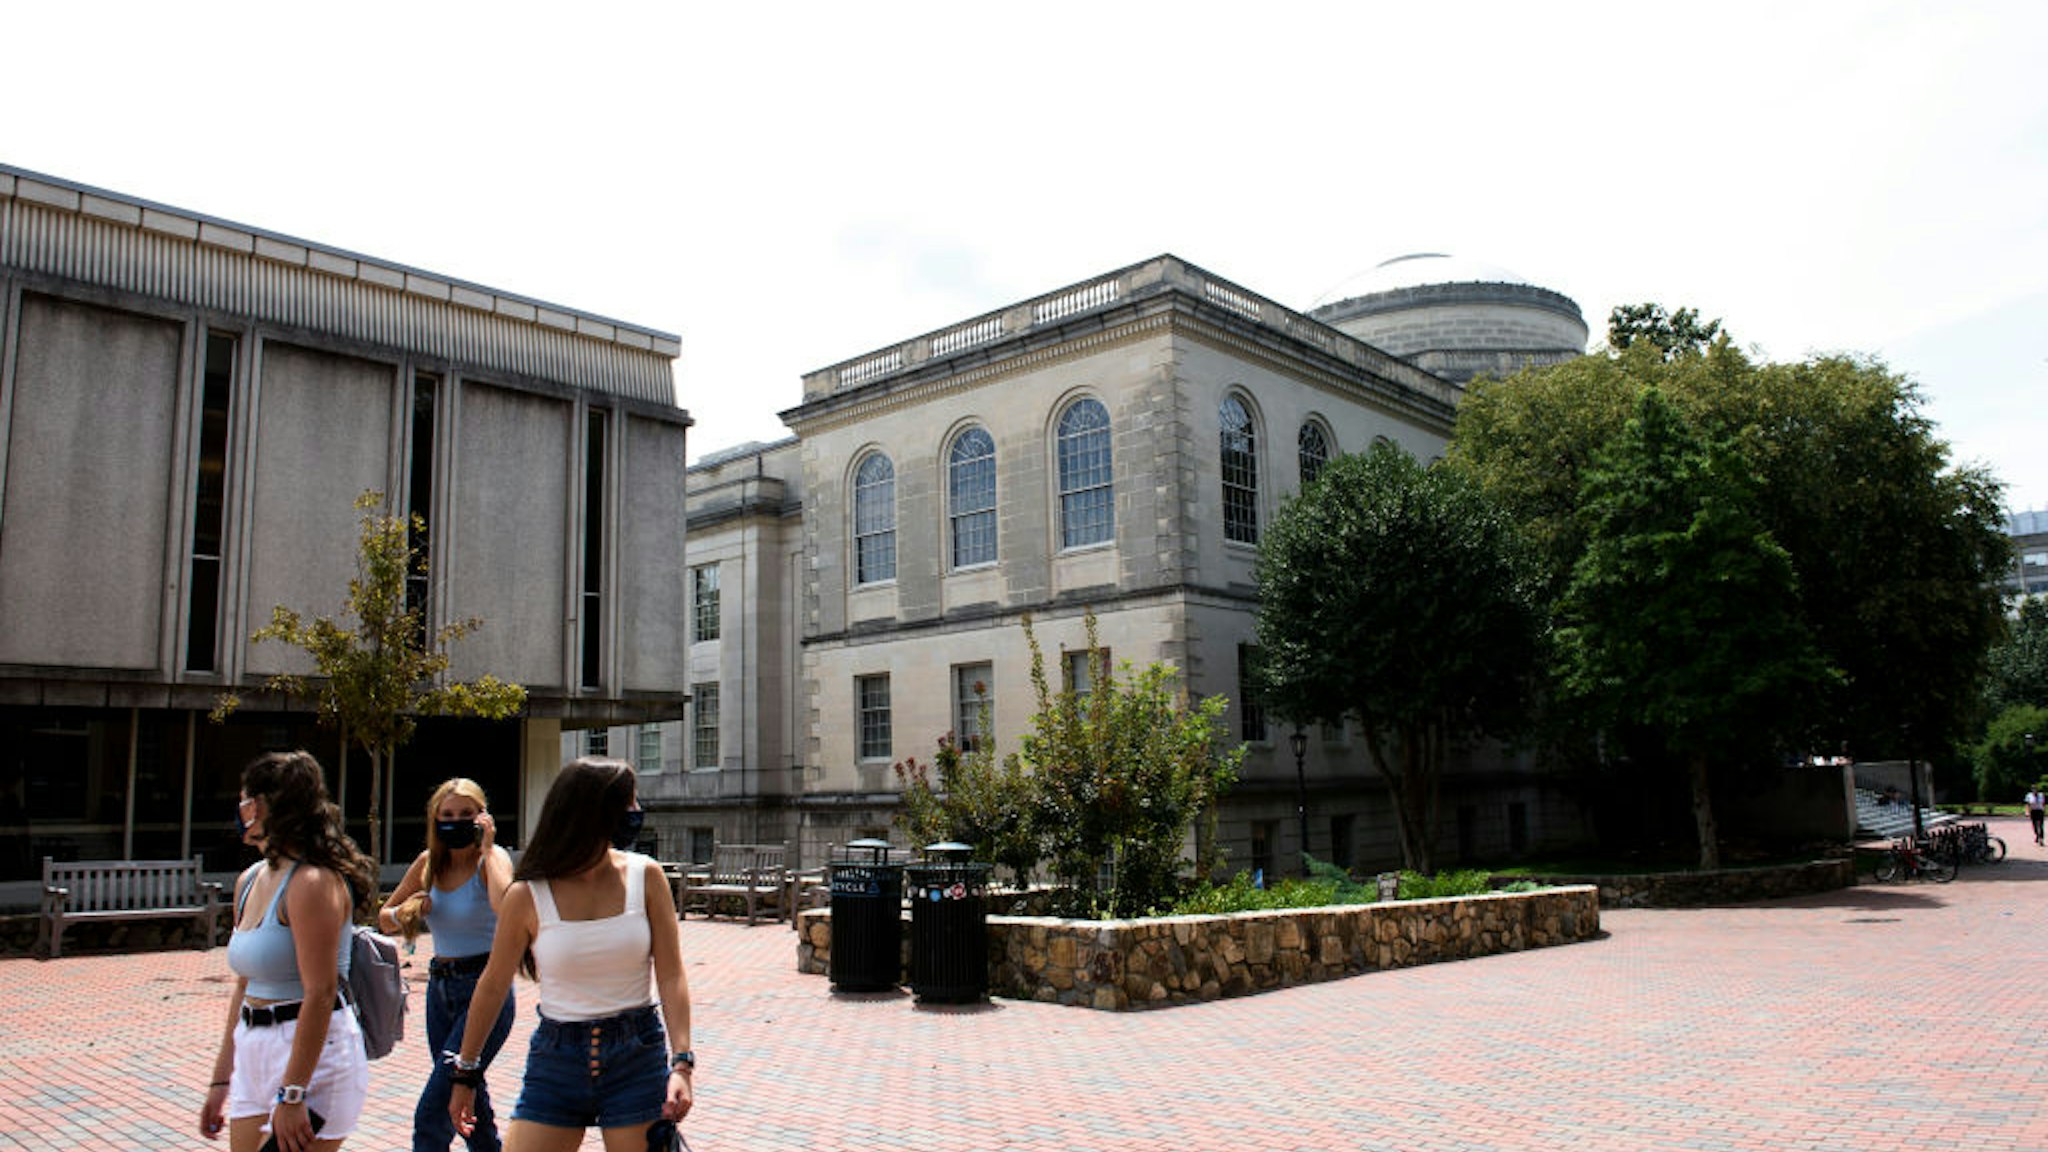 CHAPEL HILL, NC - AUGUST 18: Students walk through the campus of the University of North Carolina at Chapel Hill on August 18, 2020 in Chapel Hill, North Carolina. The school halted in-person classes and reverted back to online courses after a rise in the number of COVID-19 cases over the past week.